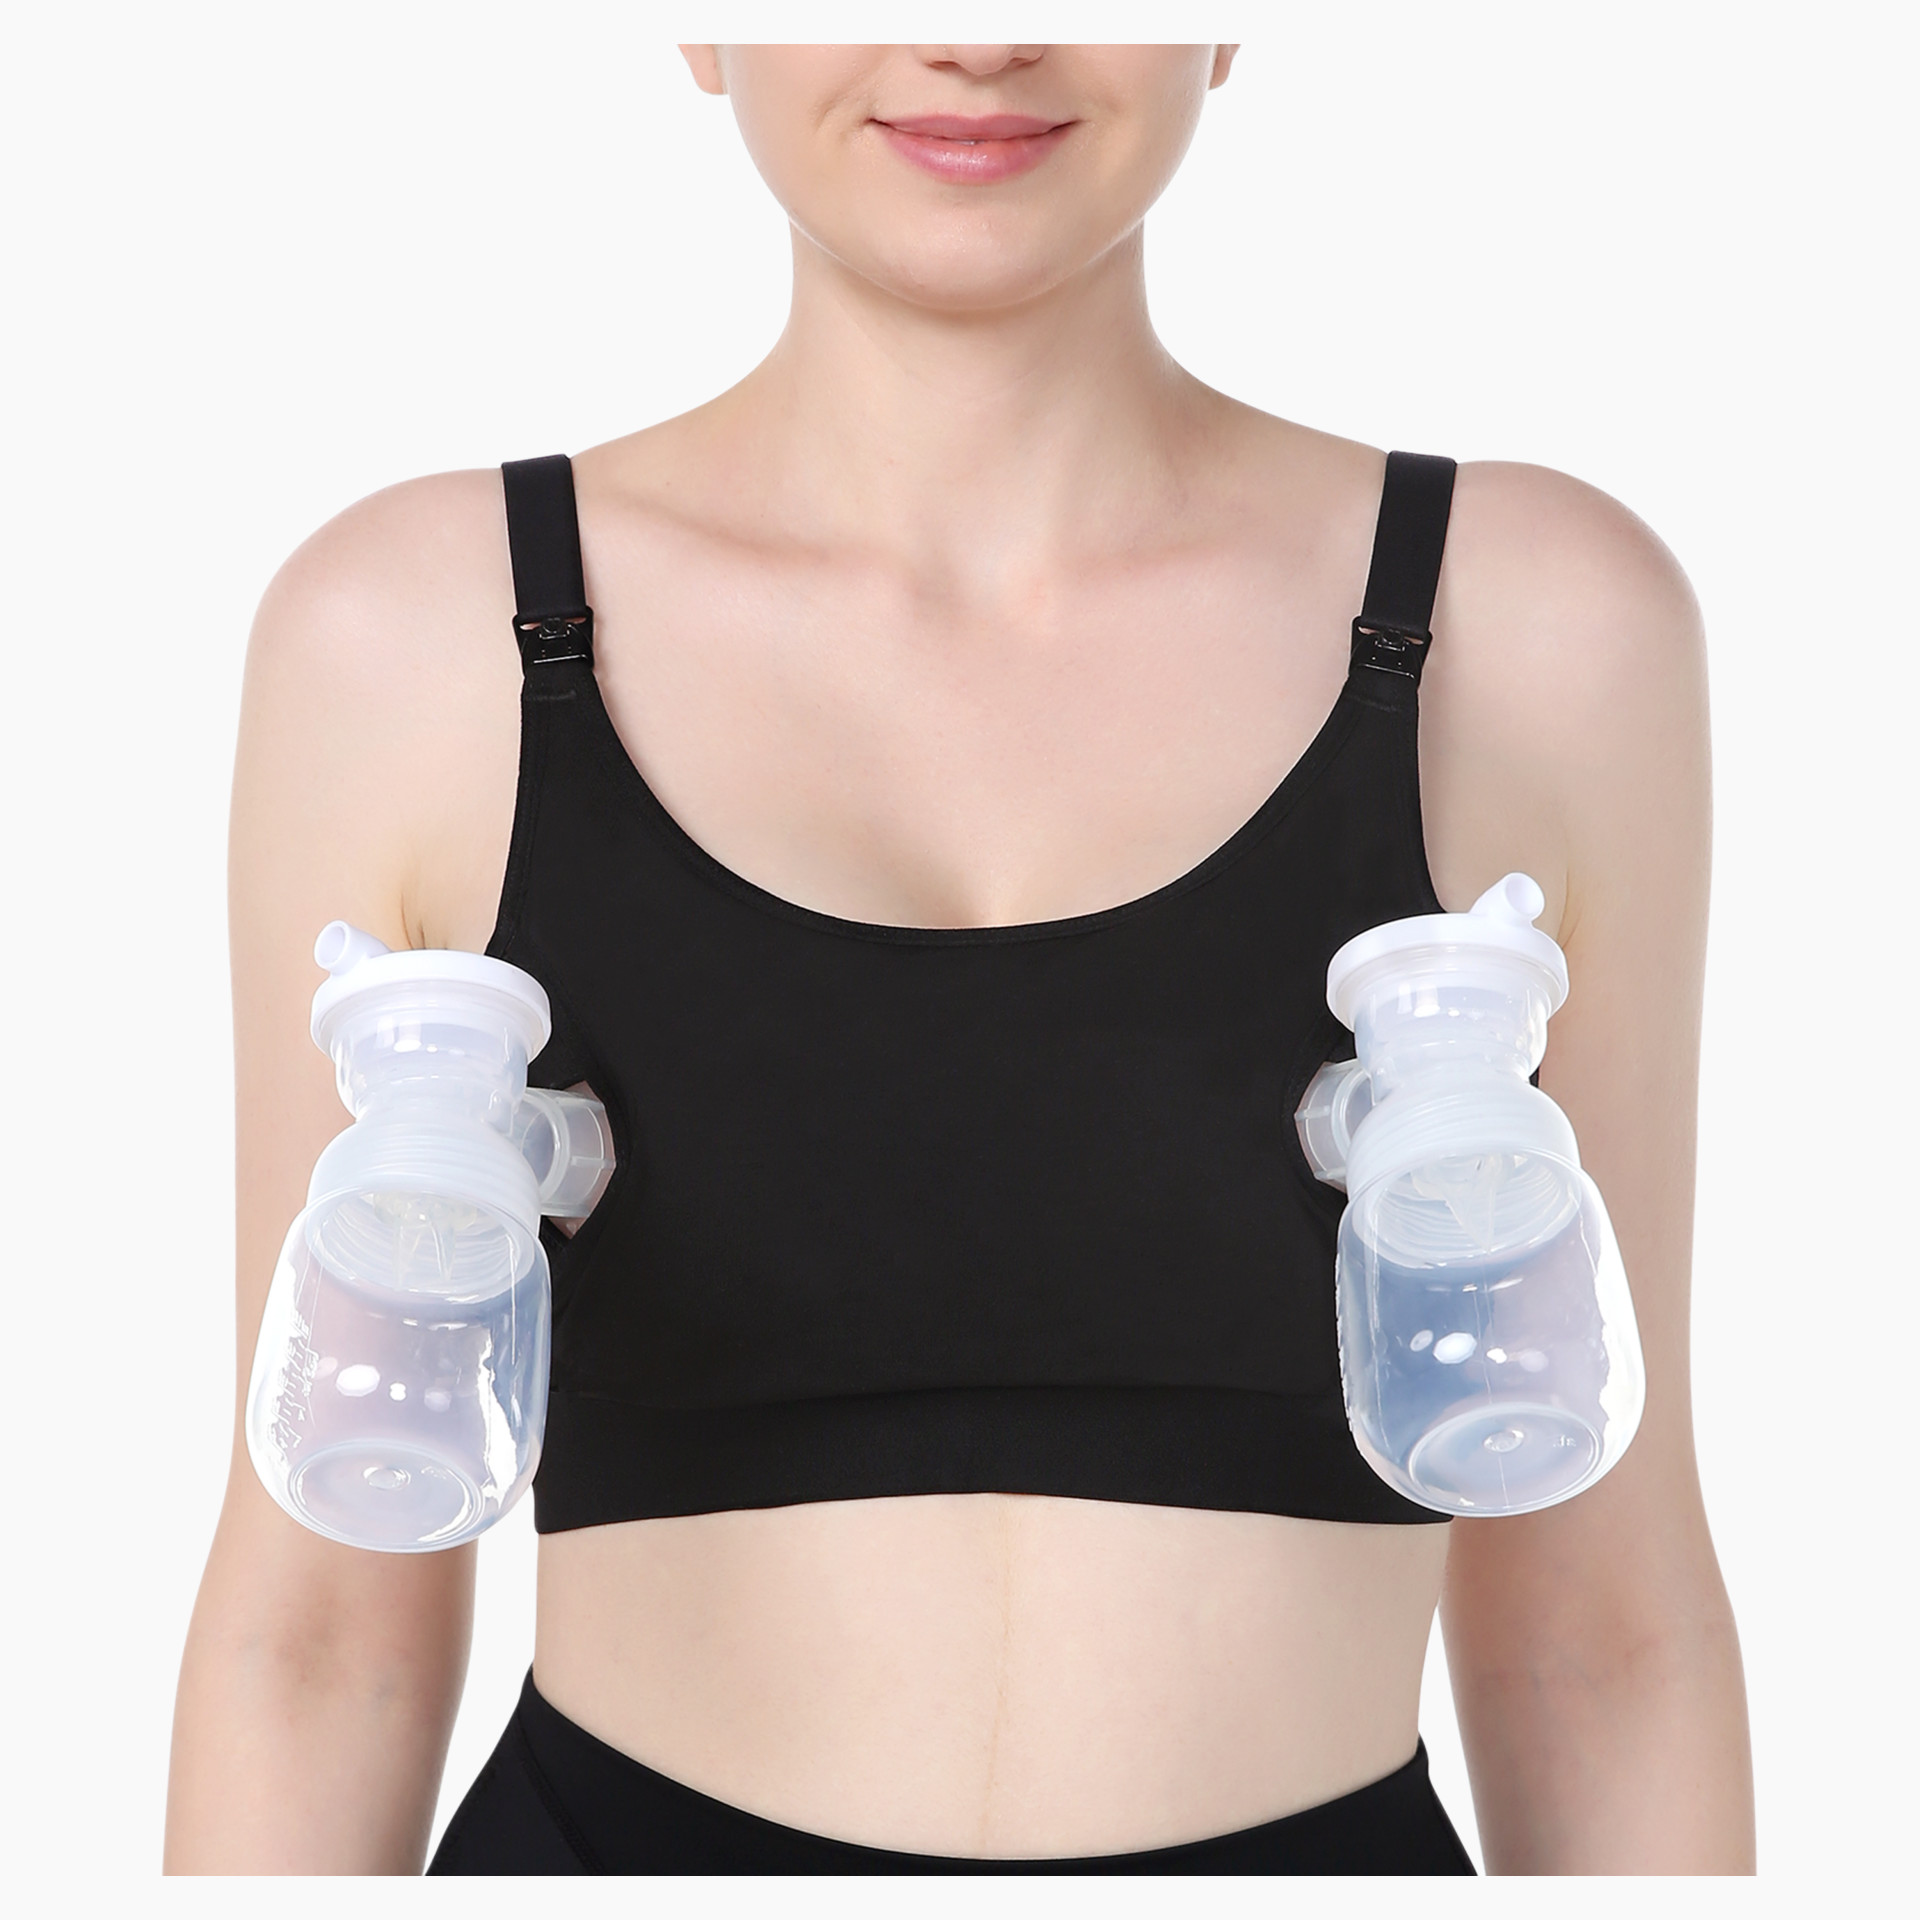 Hands Free Pumping Bra, Pumping Bras Hand Free For Women,adjustable Nursing  Bras For Pumping Hands Free,suitable For Breast-pumps By Medela, Spectra